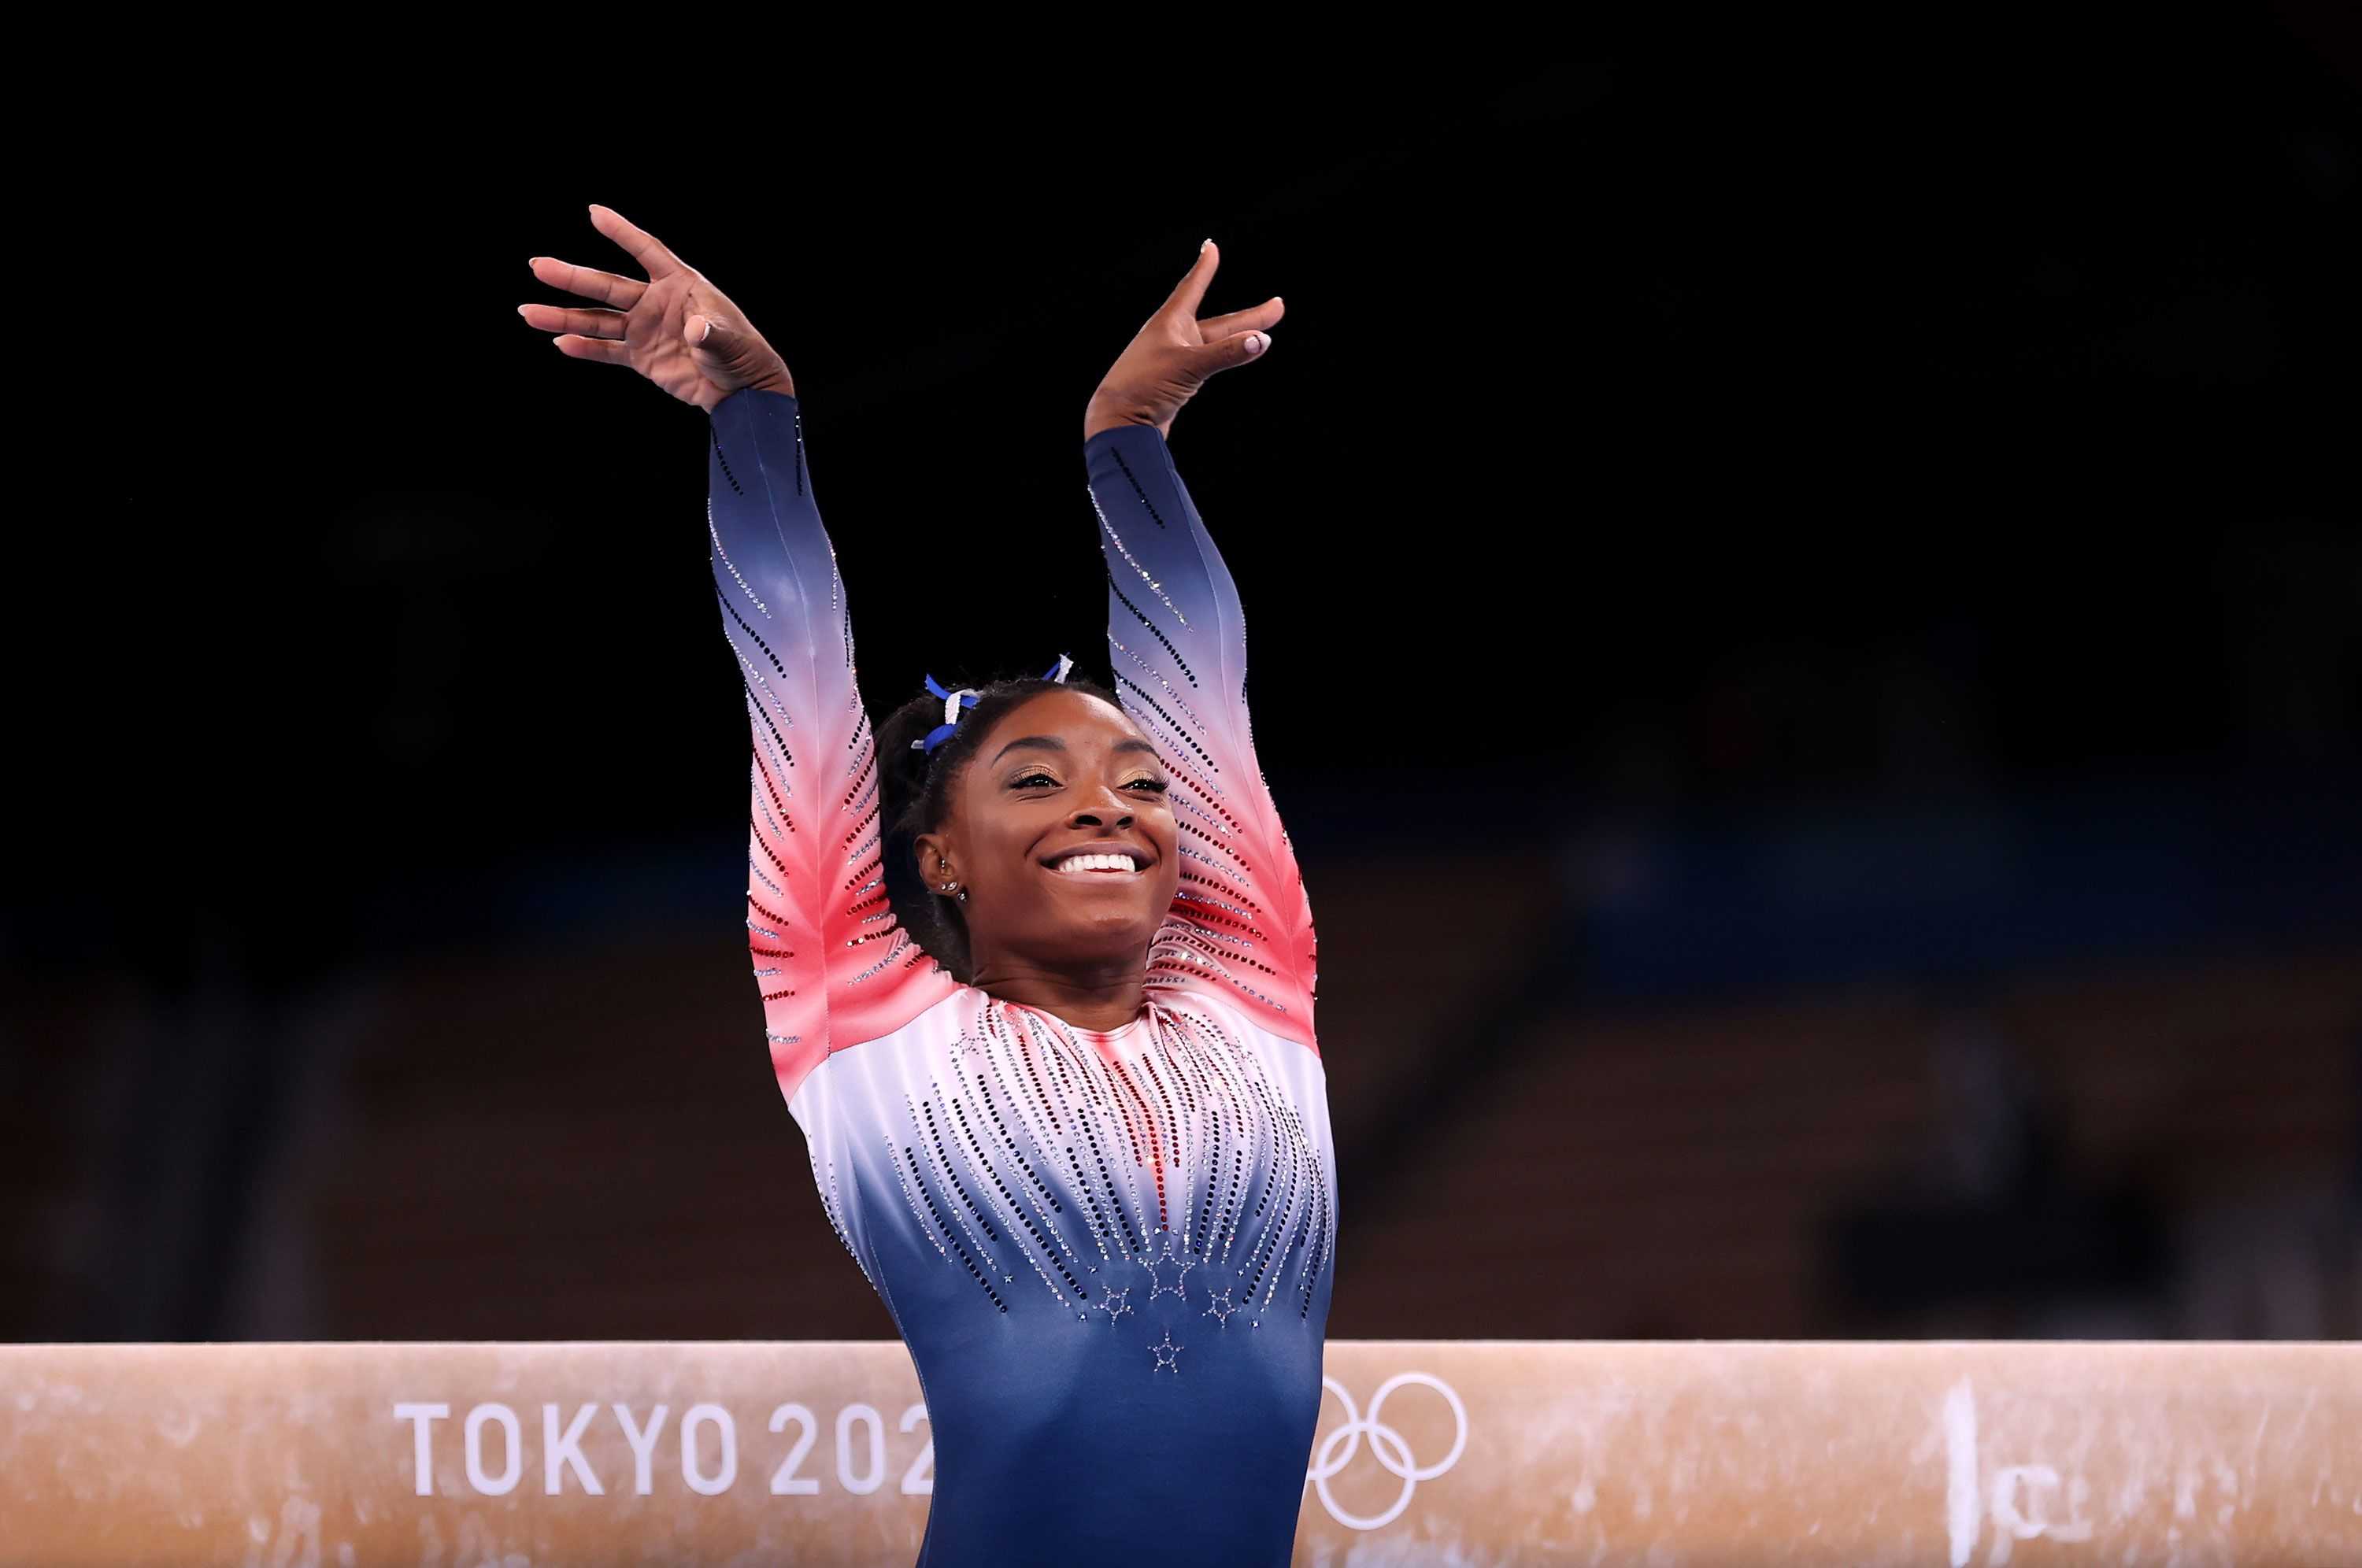 Simone Biles coming back after stepping away for mental health